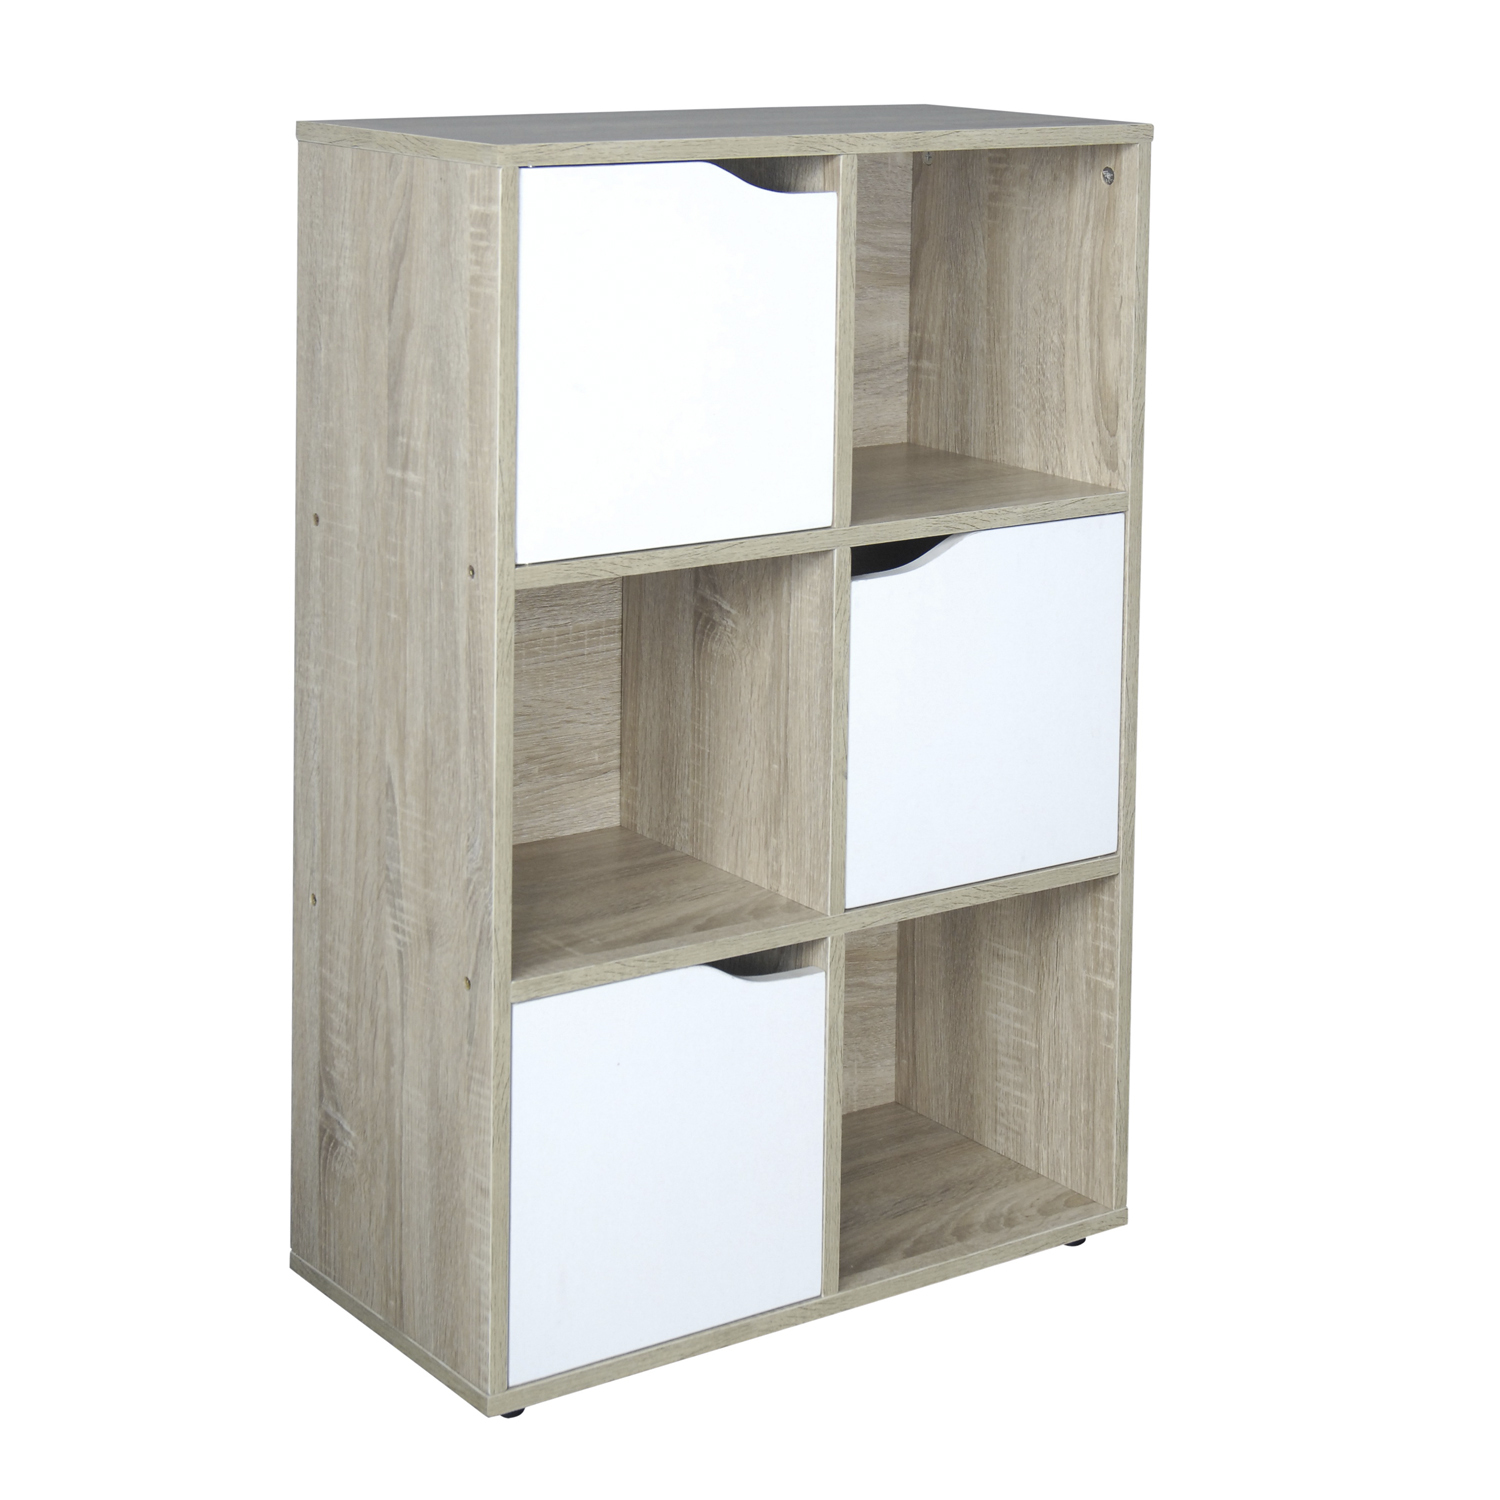 Saturn 6 Compartment Brown and White Cube Storage Shelving Unit Image 1